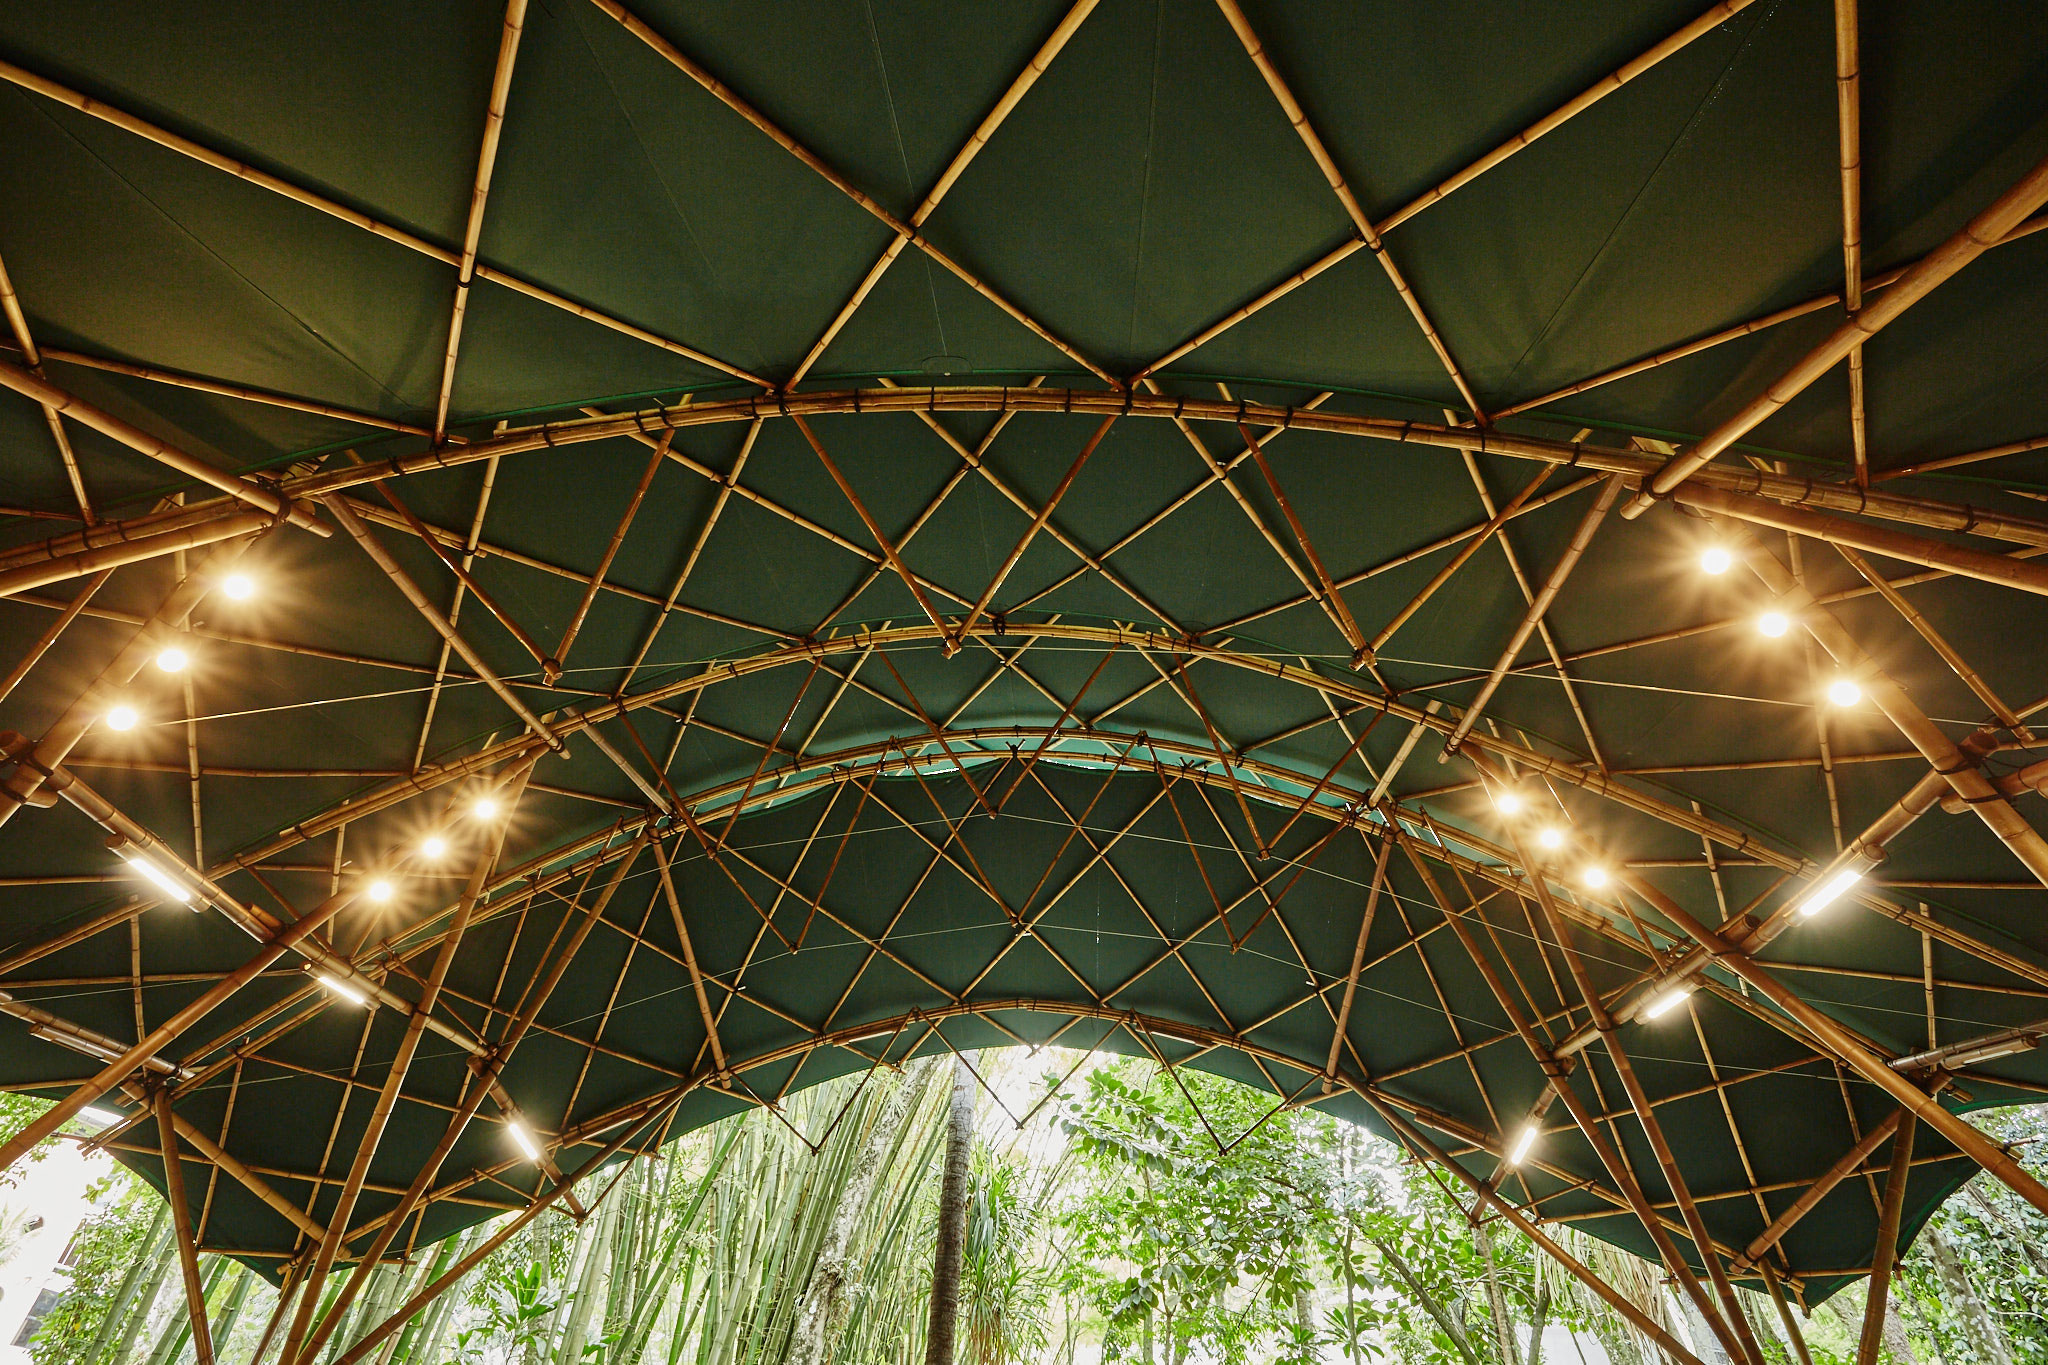 Bamboo-Active-Bending-Textile-Hybrid-Space-Structure-Roof.jpg